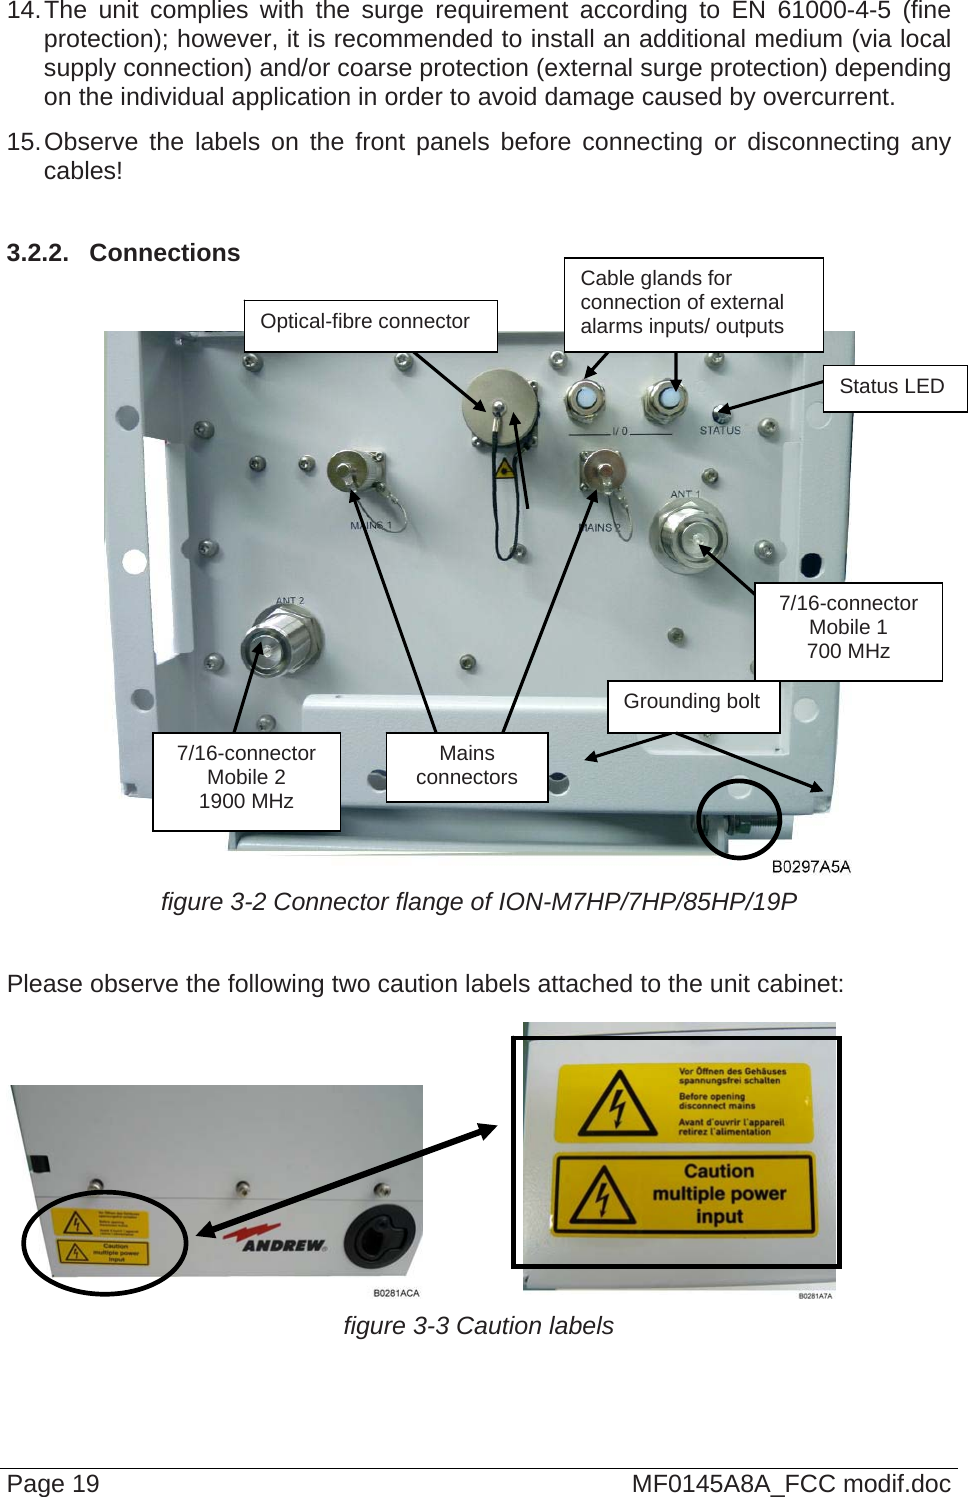  14. The unit complies with the surge requirement according to EN 61000-4-5 (fine protection); however, it is recommended to install an additional medium (via local supply connection) and/or coarse protection (external surge protection) depending on the individual application in order to avoid damage caused by overcurrent. 15. Observe the labels on the front panels before connecting or disconnecting any cables!   3.2.2.  Connections Page 19  MF0145A8A_FCC modif.doc    figure 3-2 Connector flange of ION-M7HP/7HP/85HP/19P  Please observe the following two caution labels attached to the unit cabinet:      figure 3-3 Caution labels Cable glands for connection of external alarms inputs/ outputs Optical-fibre connector Status LED 7/16-connector Mobile 1 700 MHz Grounding bolt Mains  connectors 7/16-connector Mobile 2 1900 MHz 